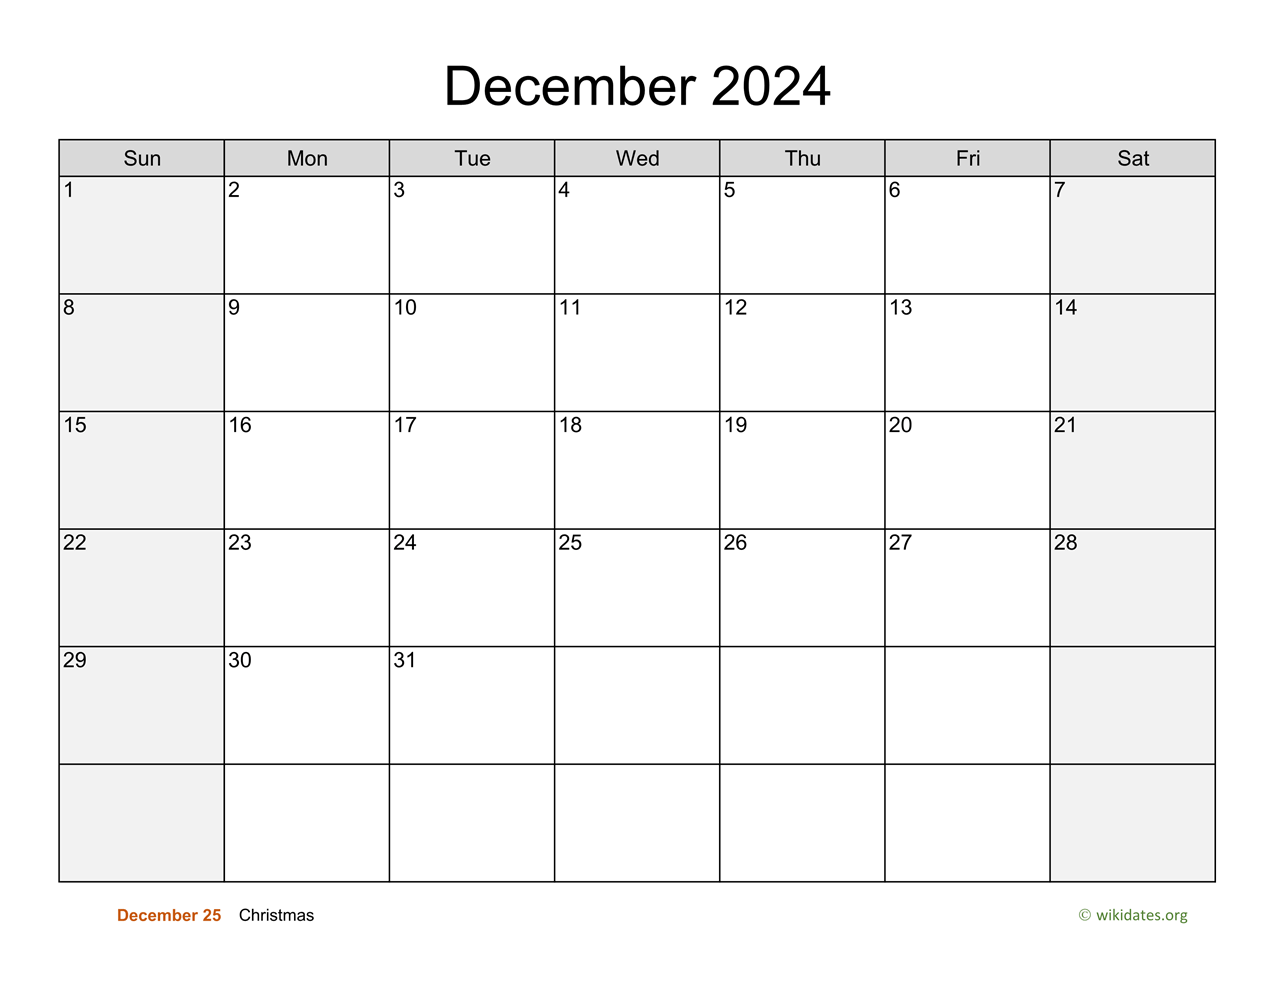 December 2024 Calendar with Weekend Shaded